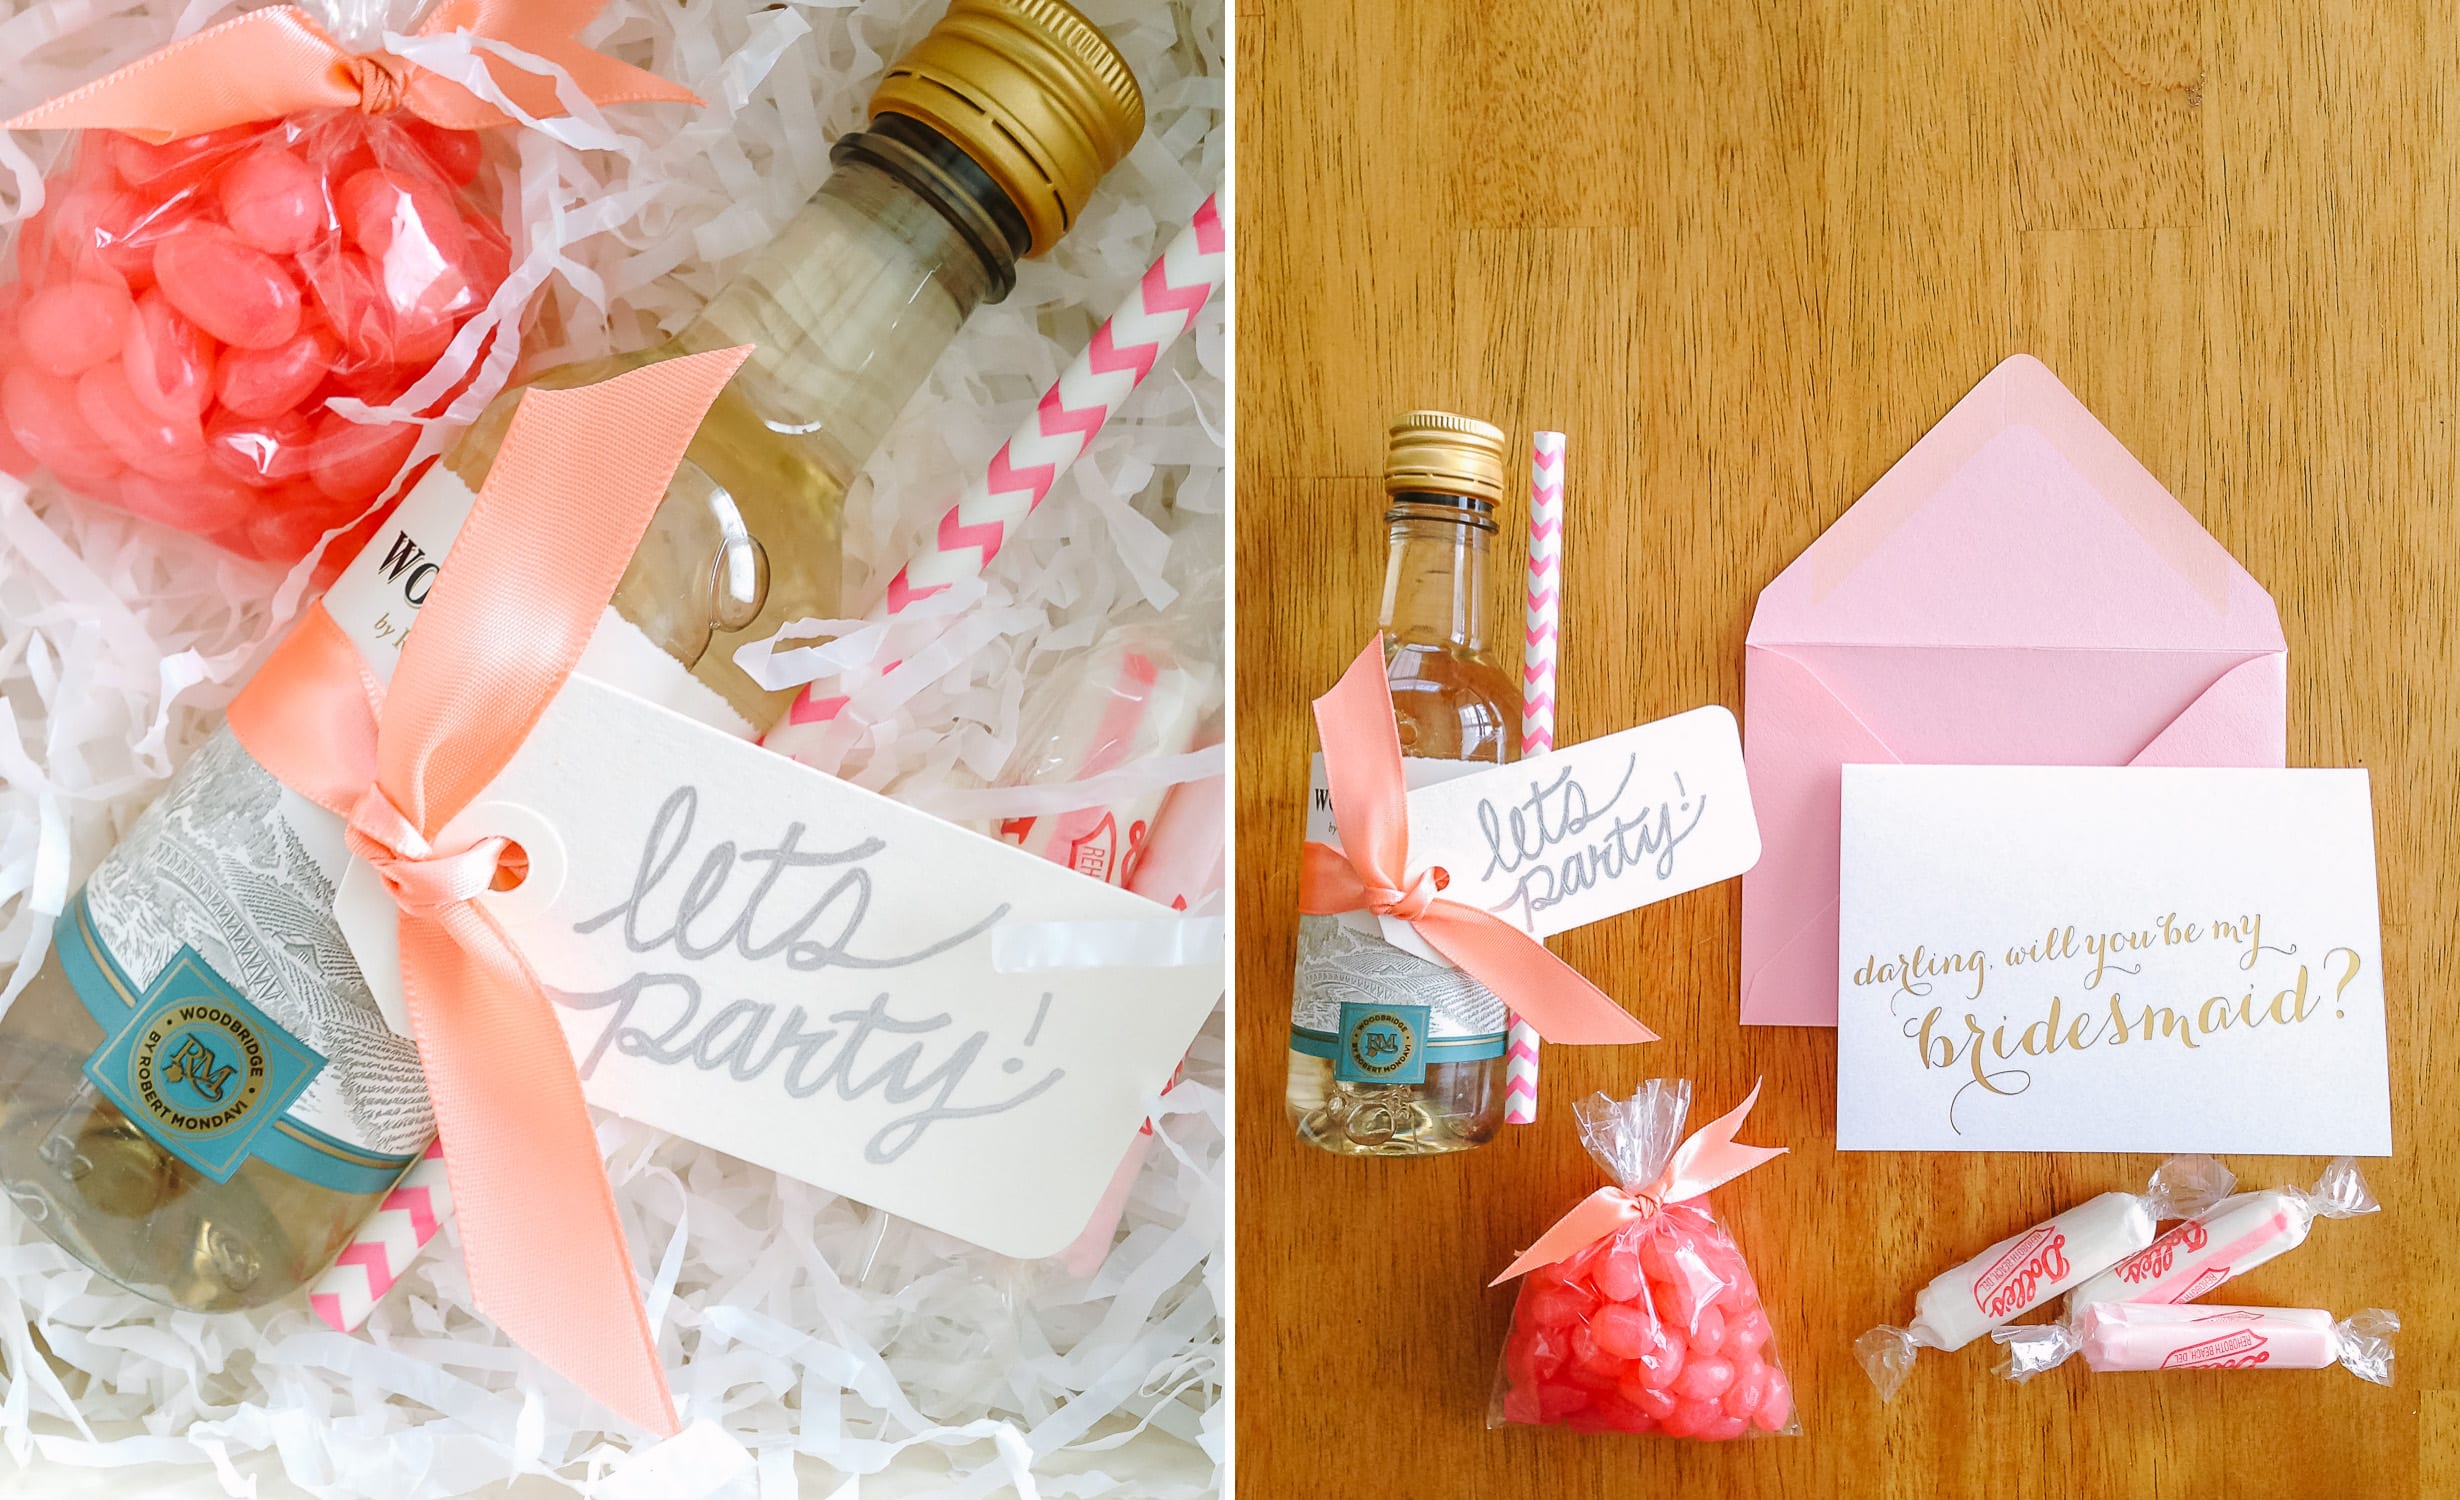 Bridesmaid Packages | How to ask your Bridesmaids to be in your wedding